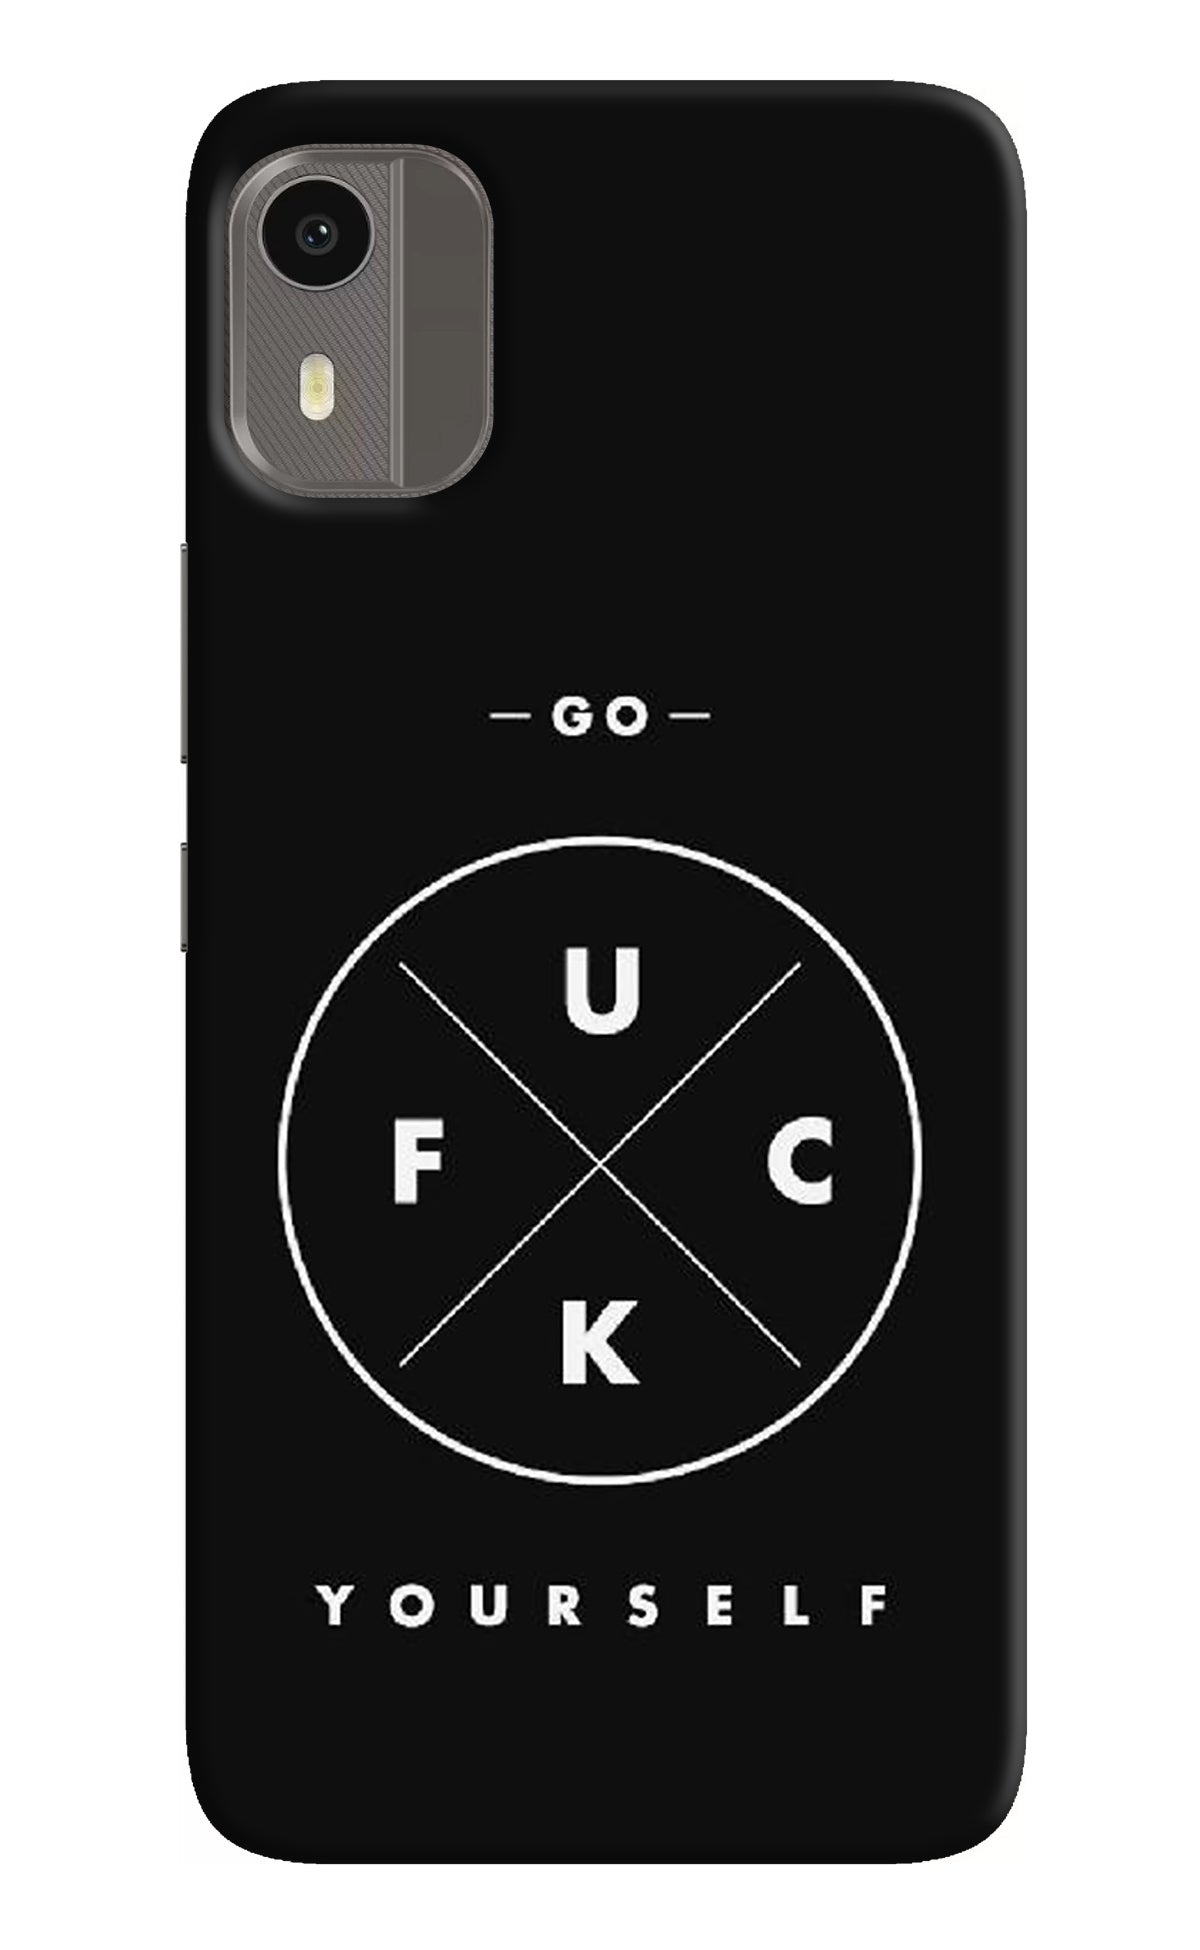 Go Fuck Yourself Nokia C12/C12 Pro Back Cover